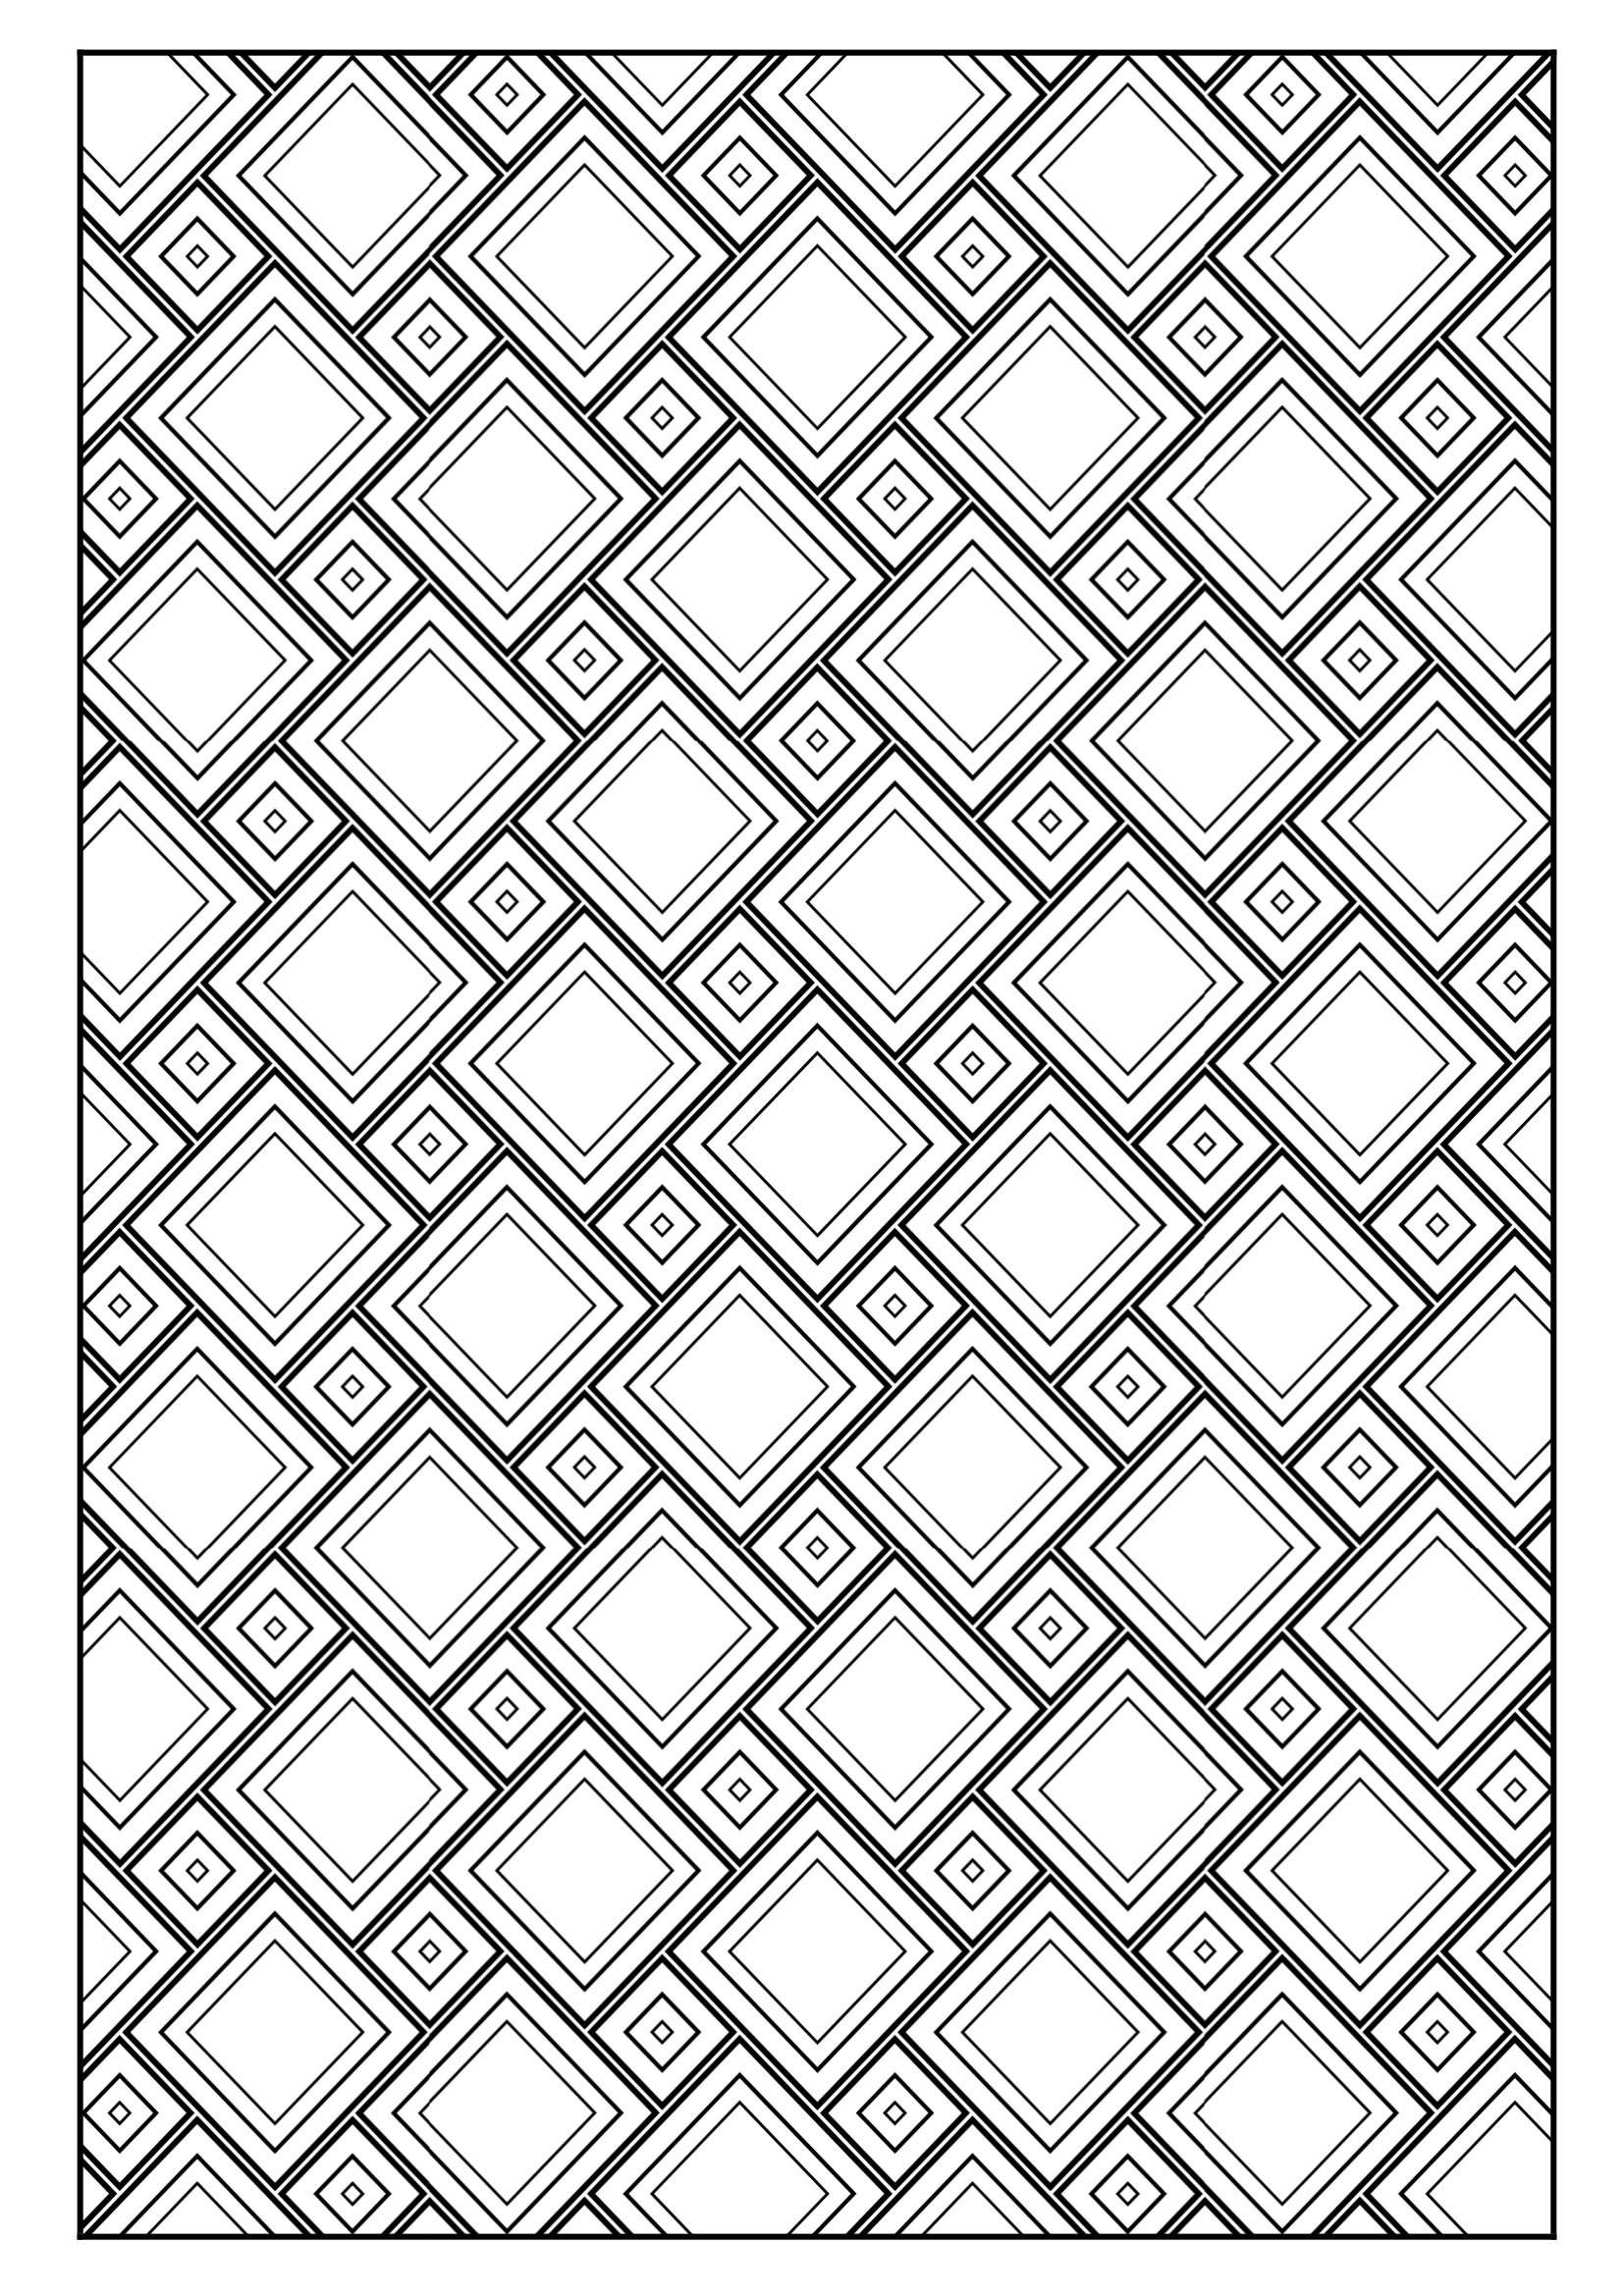 Set of printable coloring pages with geometric designs kids and adults coloring pages patterns relaxing activity stress relief vol instant download